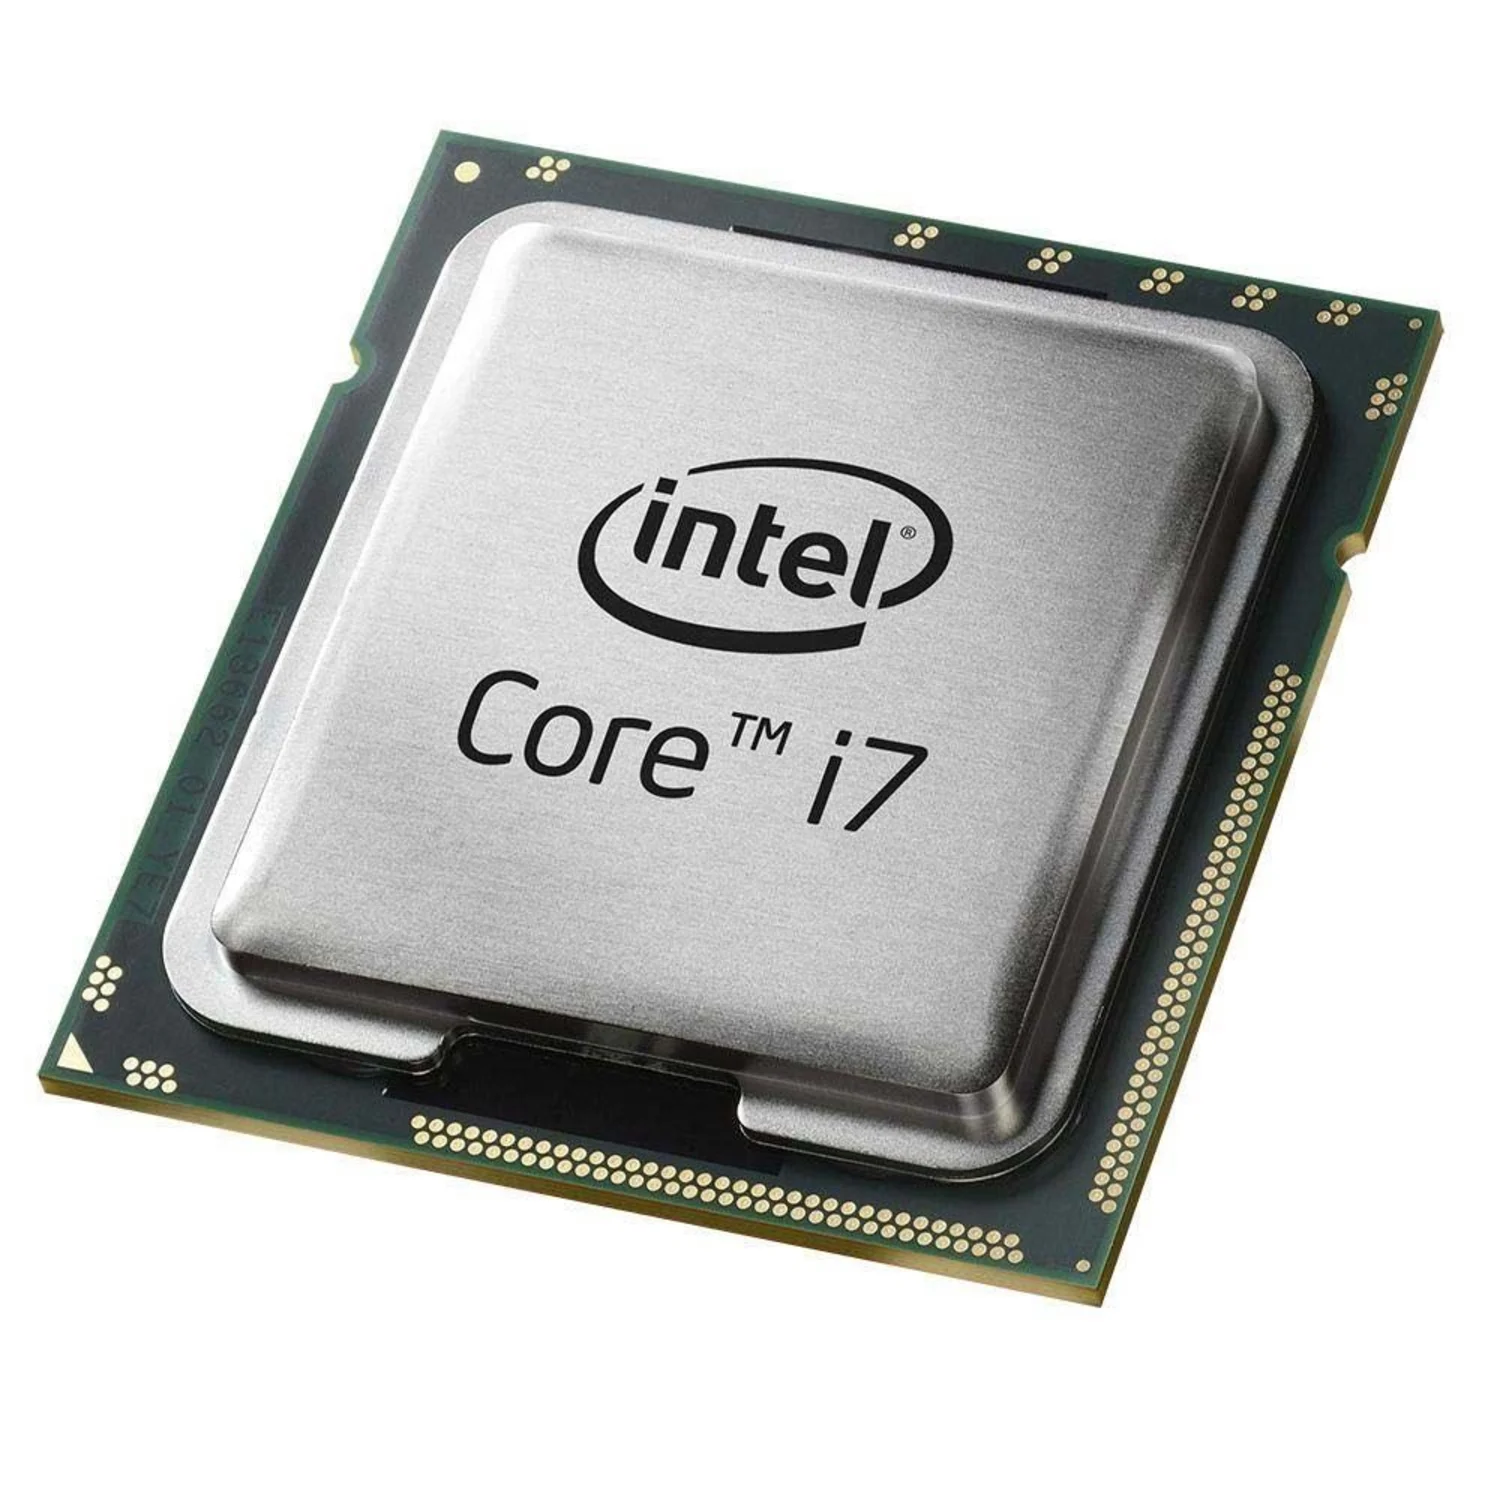 Processador Intel Core i7 3770 OEM Socket 1155 4 Cores 8 Threads 3.90 GHz 3.40 GHz Turbo Cache 8 MB

